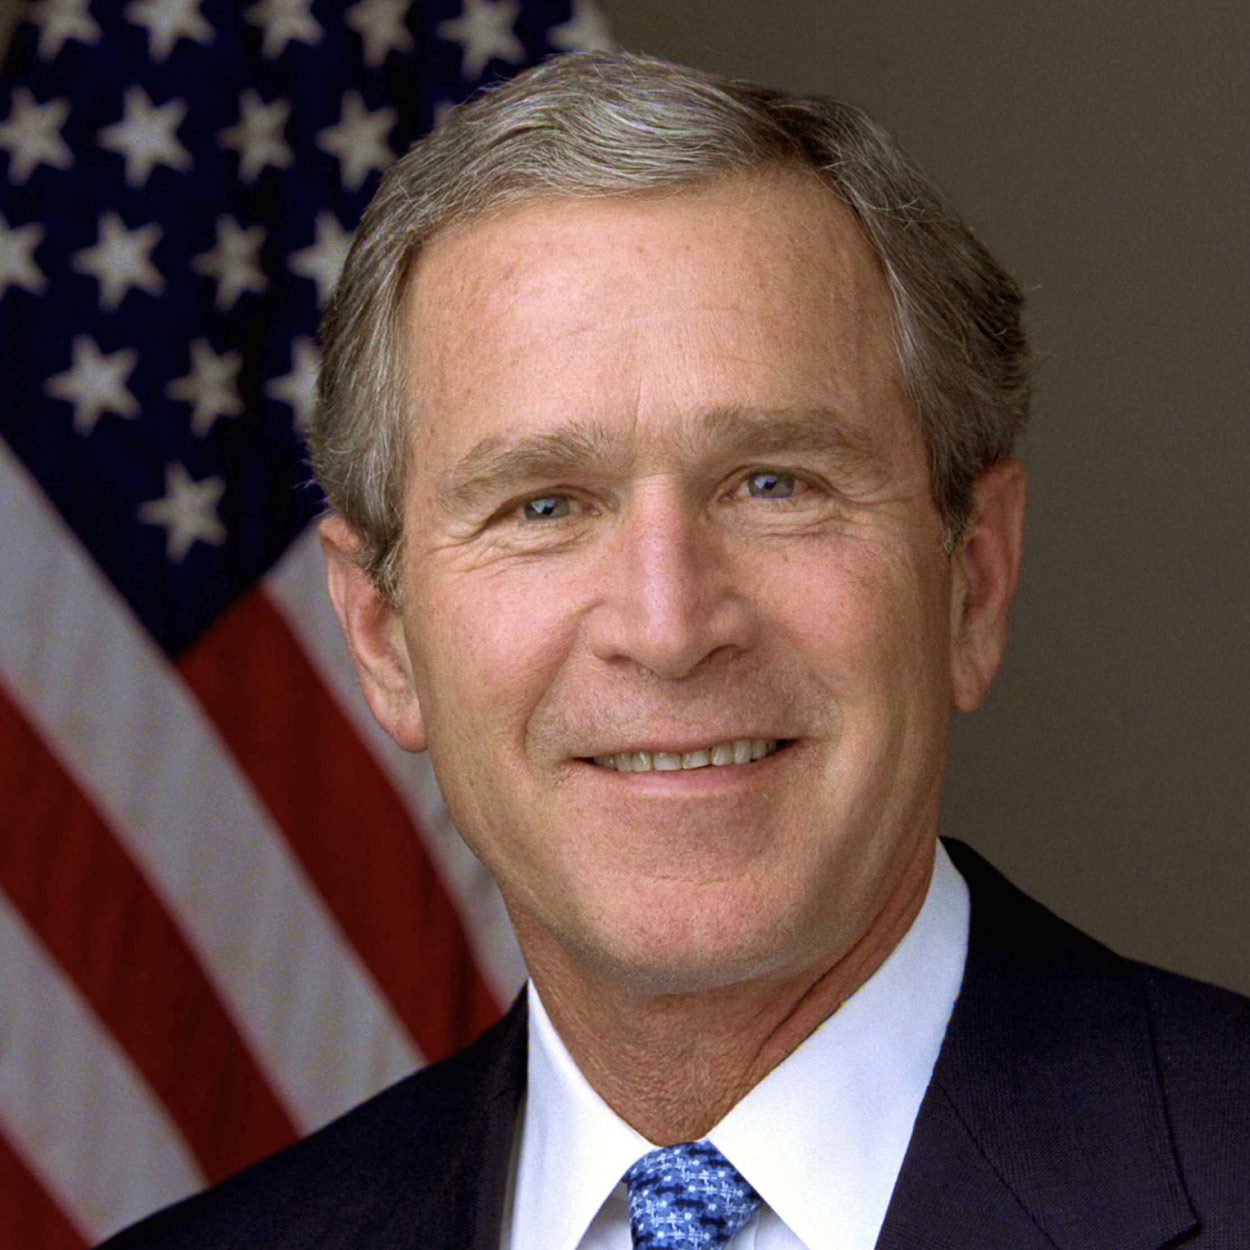 Portrait of George W. Bush, the 43rd President of the United States